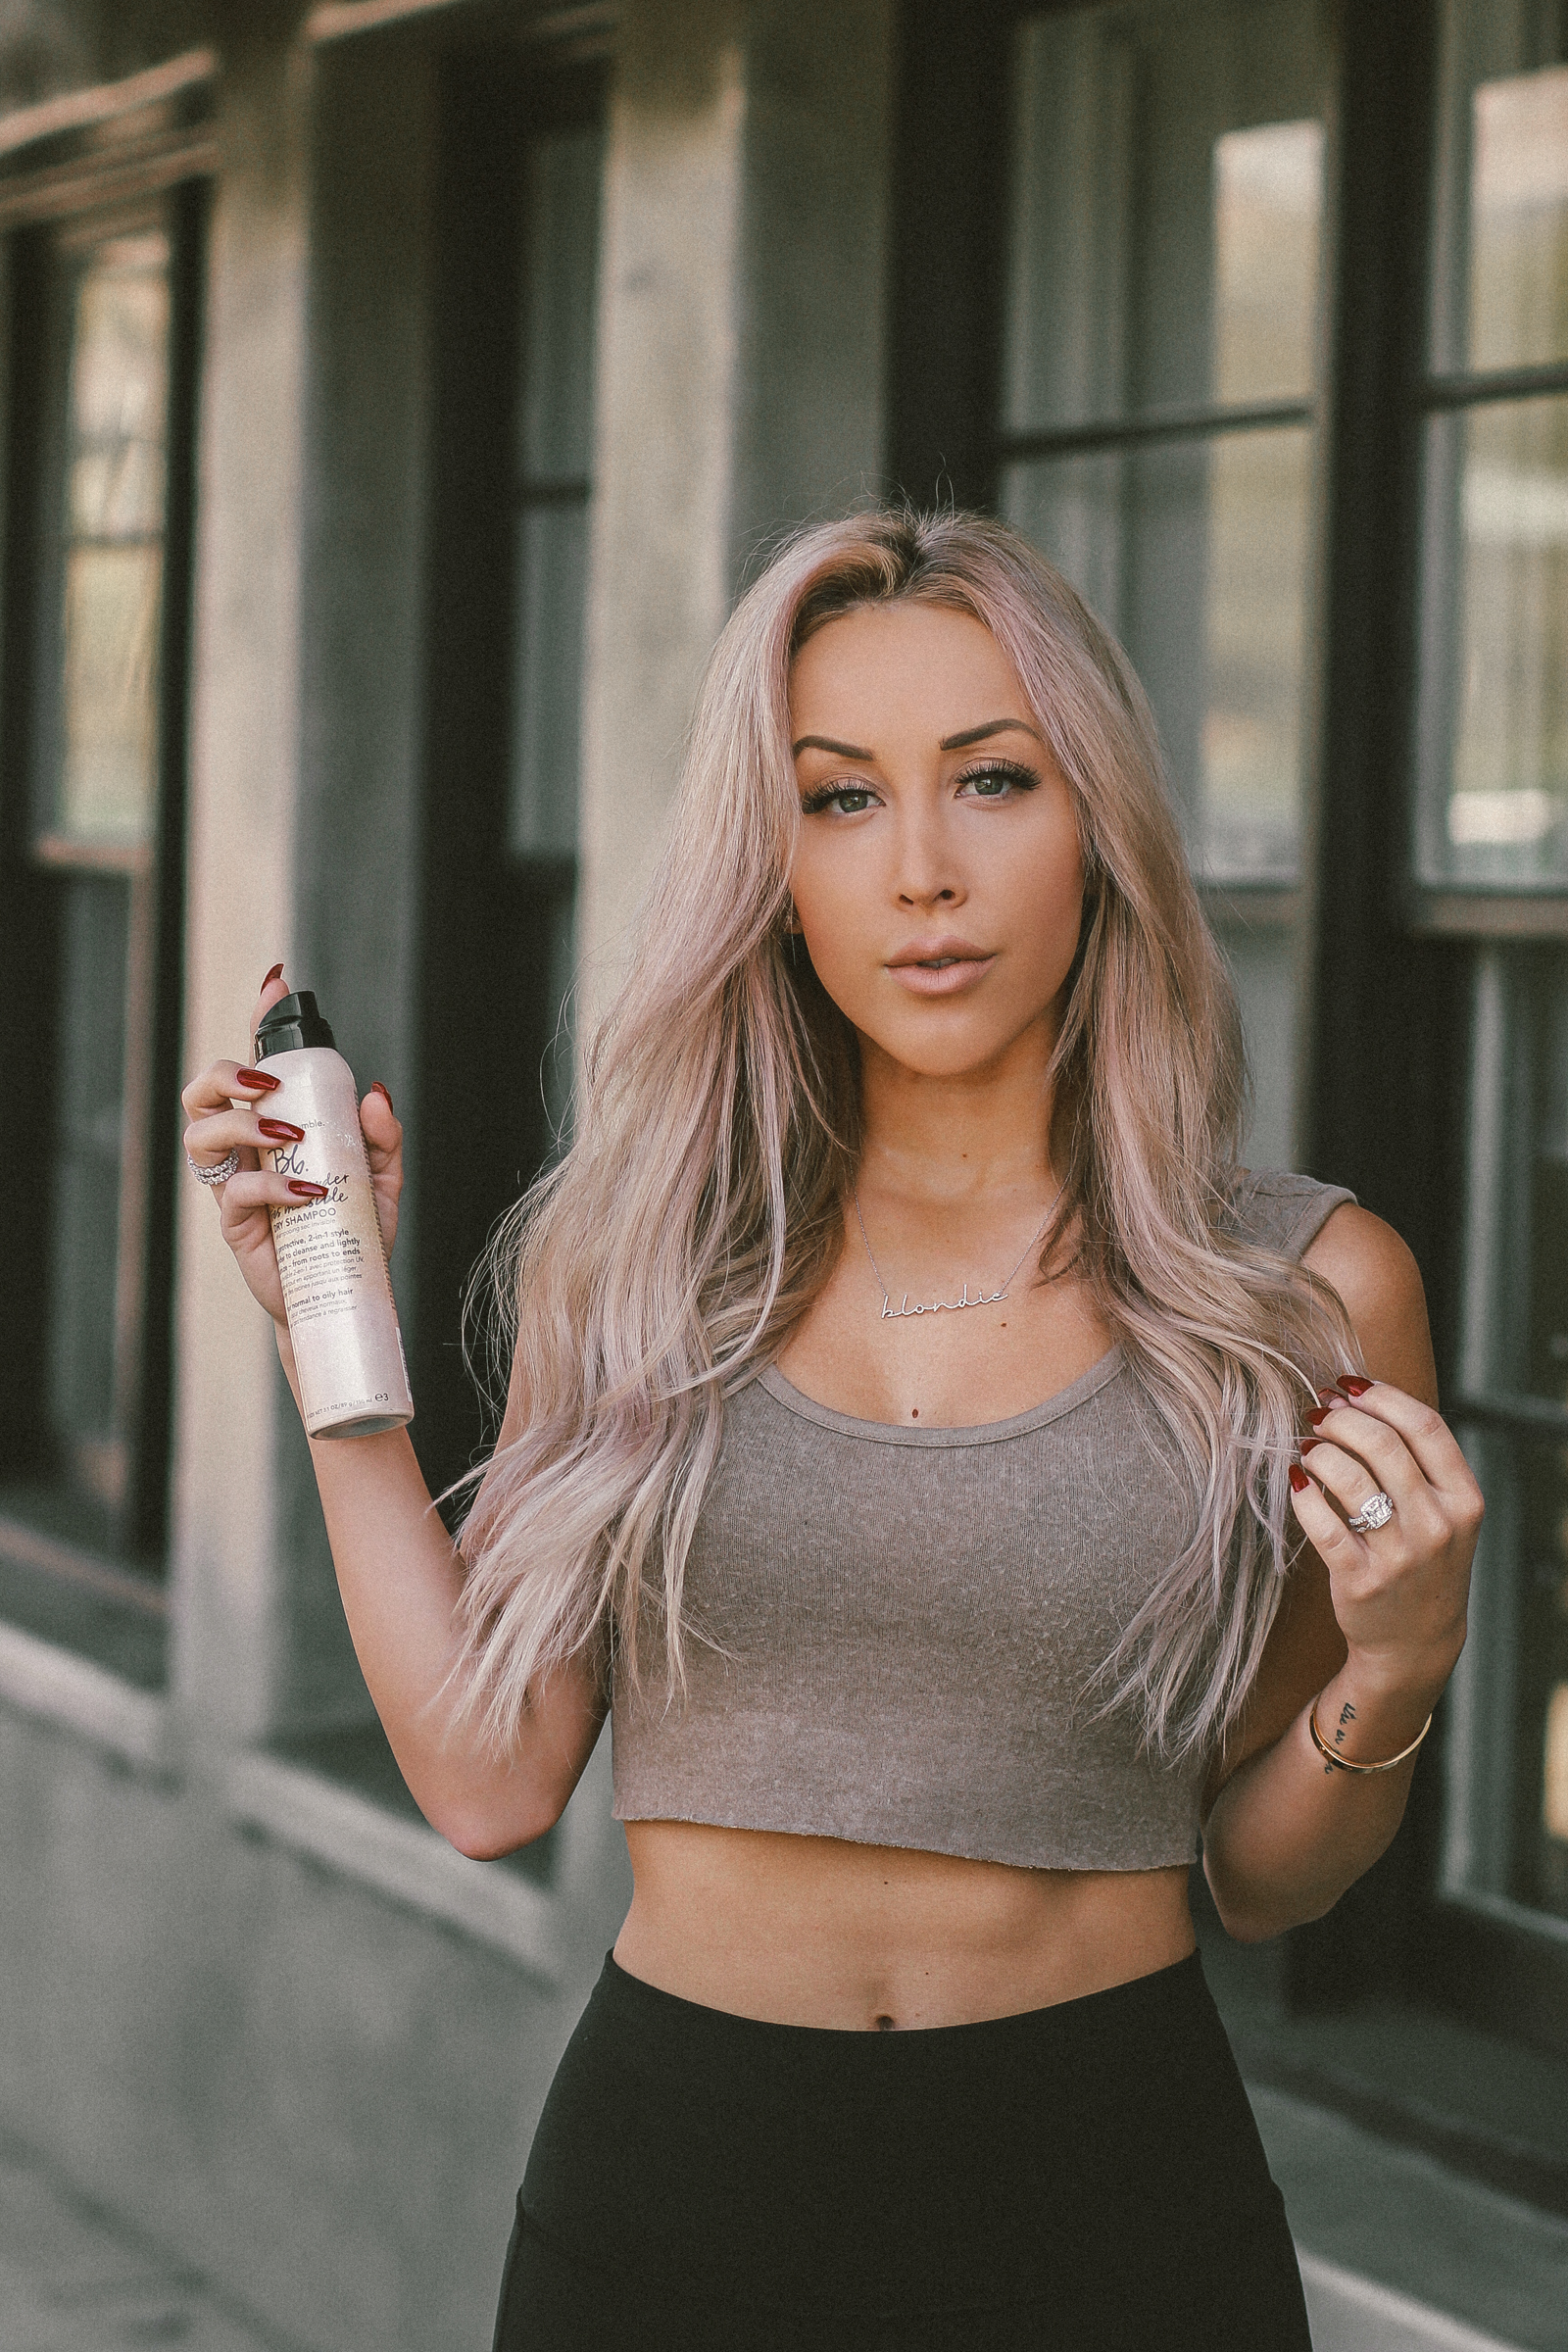 Best Dry Shampoo | Pret-a-Powder Bumble and Bumble | Hair inspo | Pastel Pink Hair | Blondie in the City by Hayley Larue